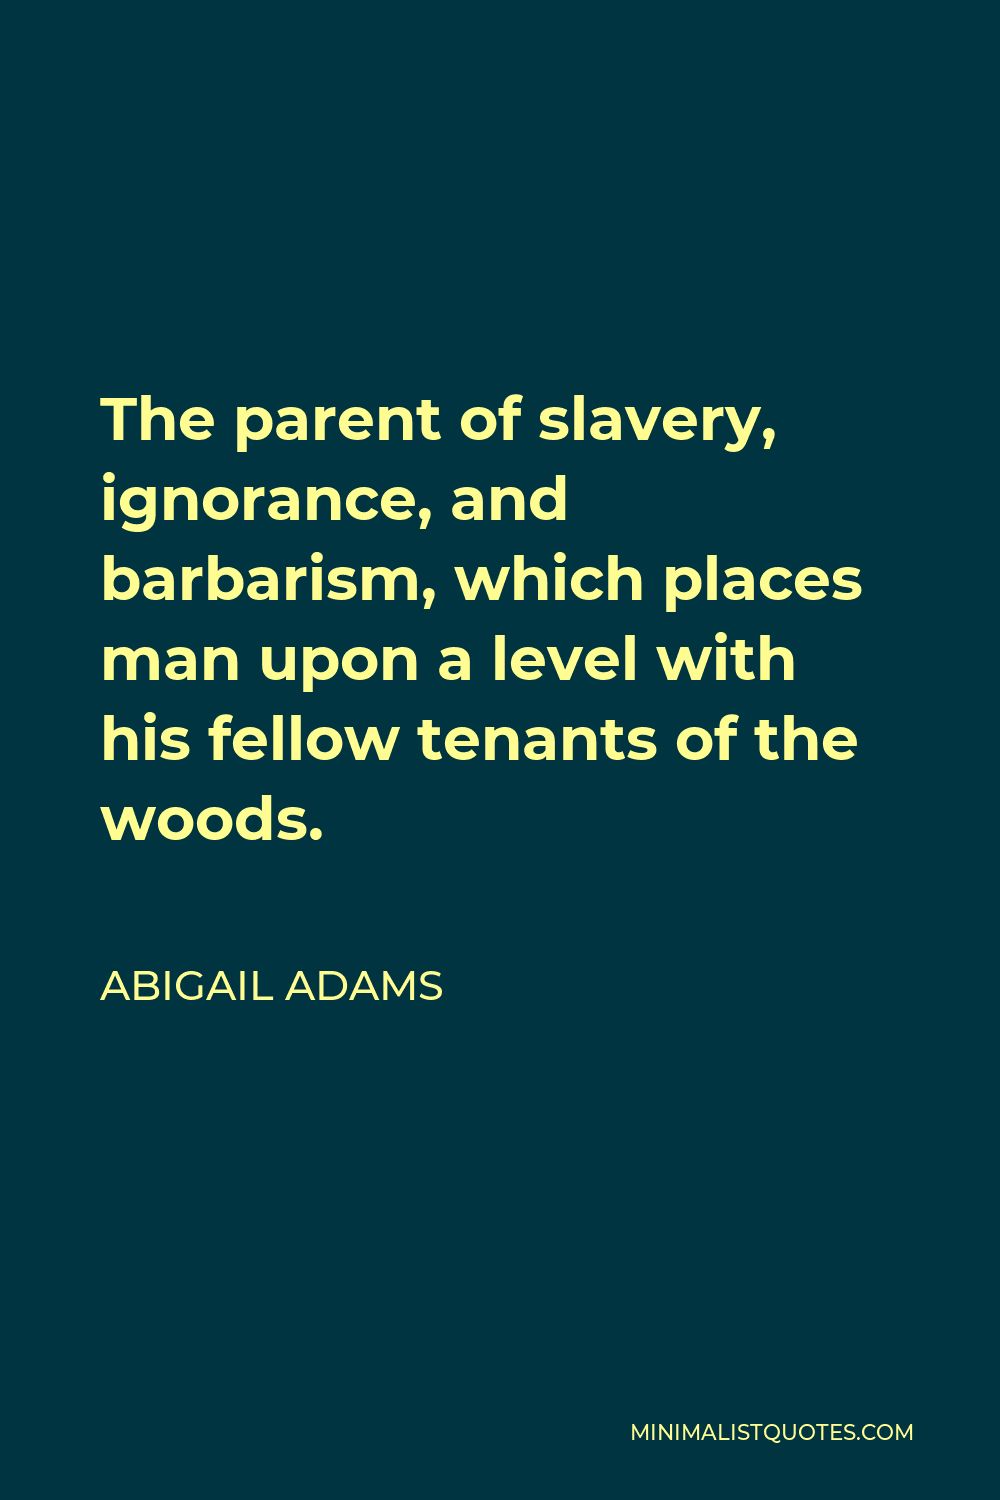 Abigail Adams Quote - The parent of slavery, ignorance, and barbarism, which places man upon a level with his fellow tenants of the woods.